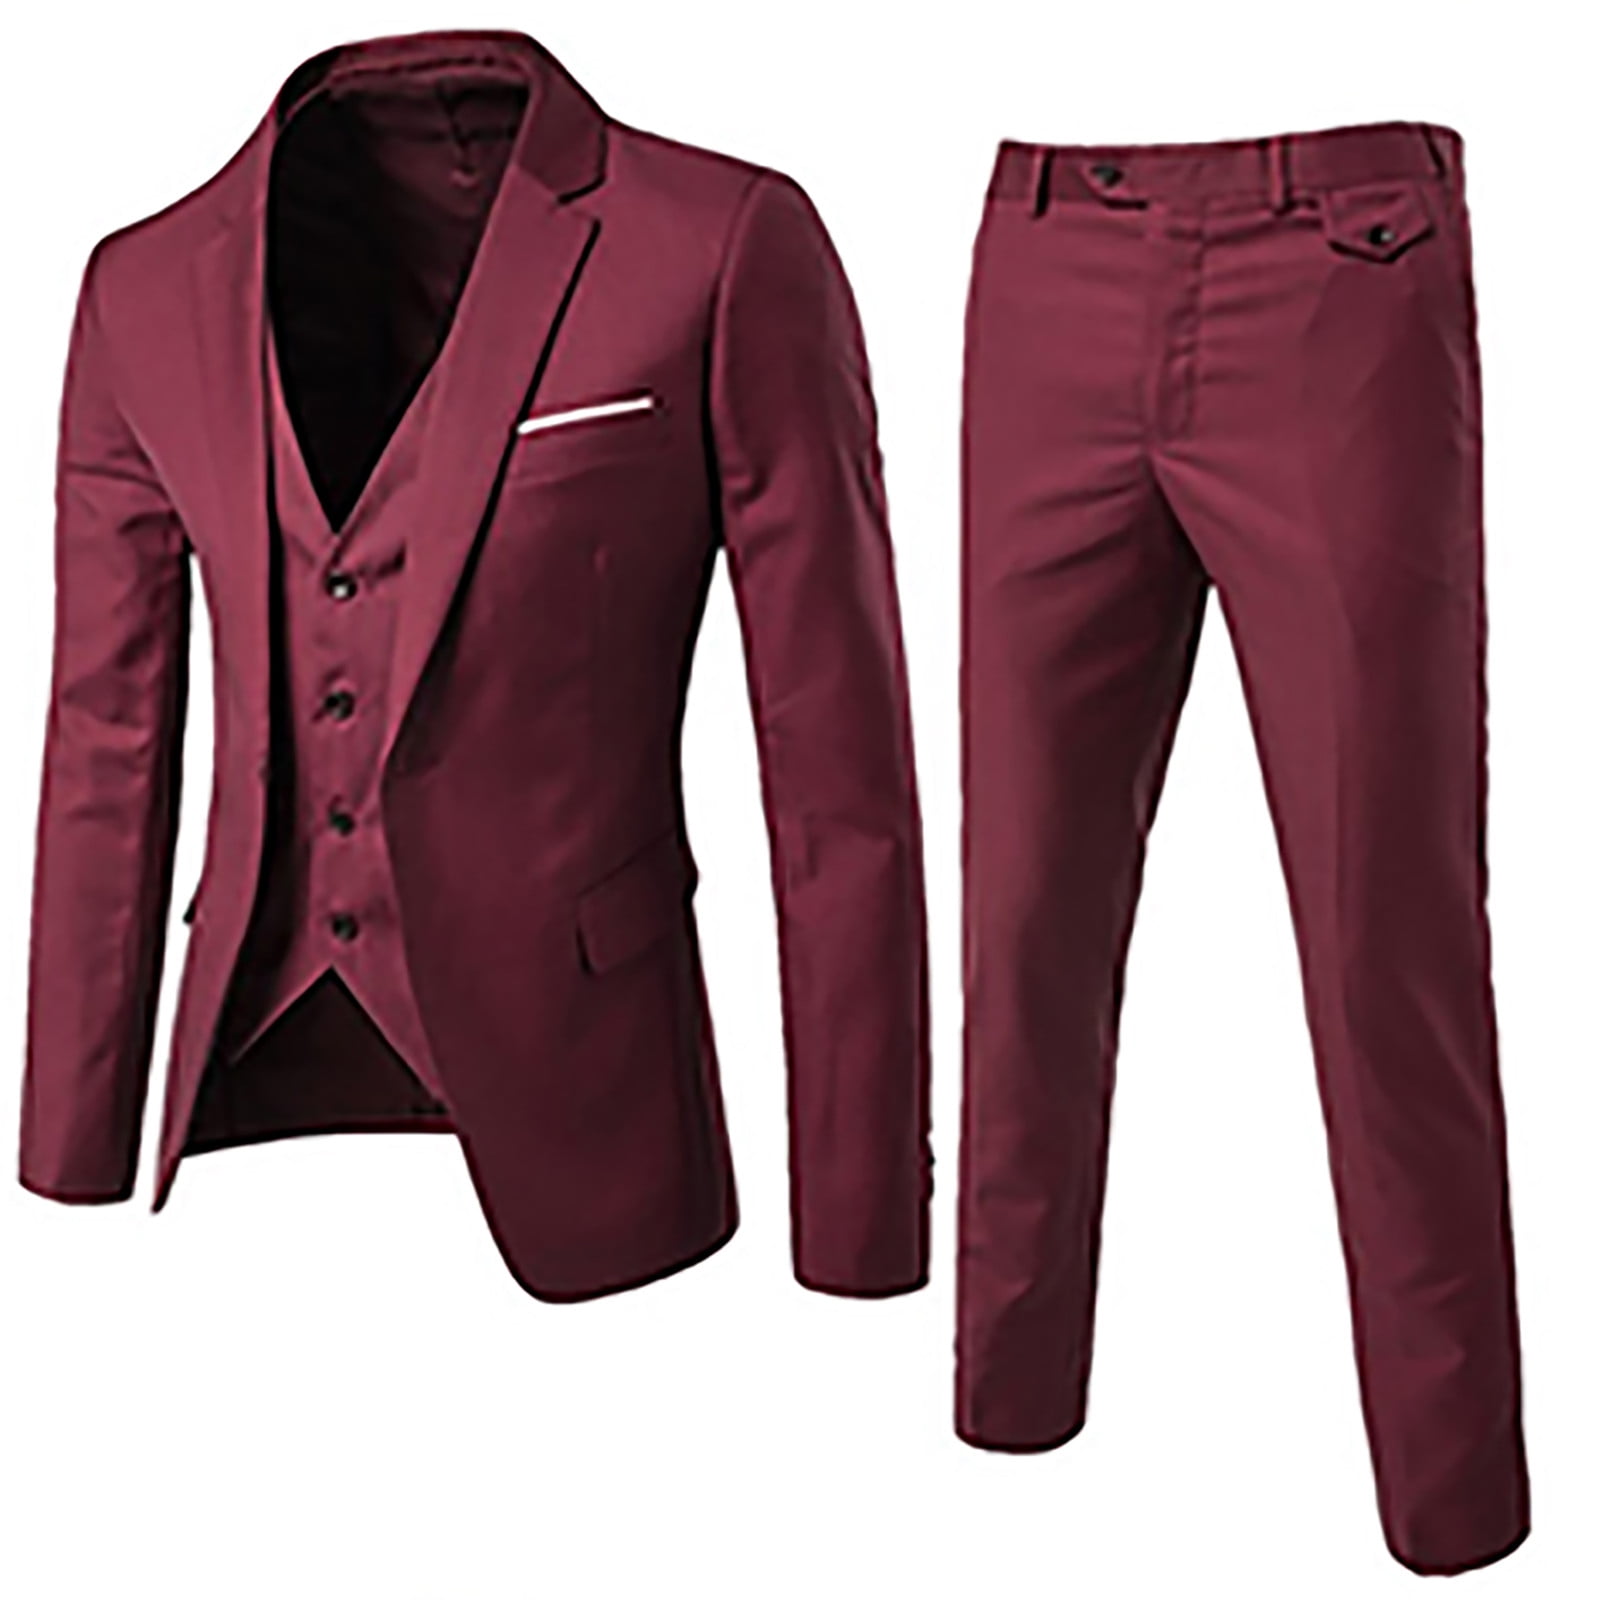 Winter Savings! TMOYZQ Mens Suits Set 3 Piece One Button Solid Tuxedo ...